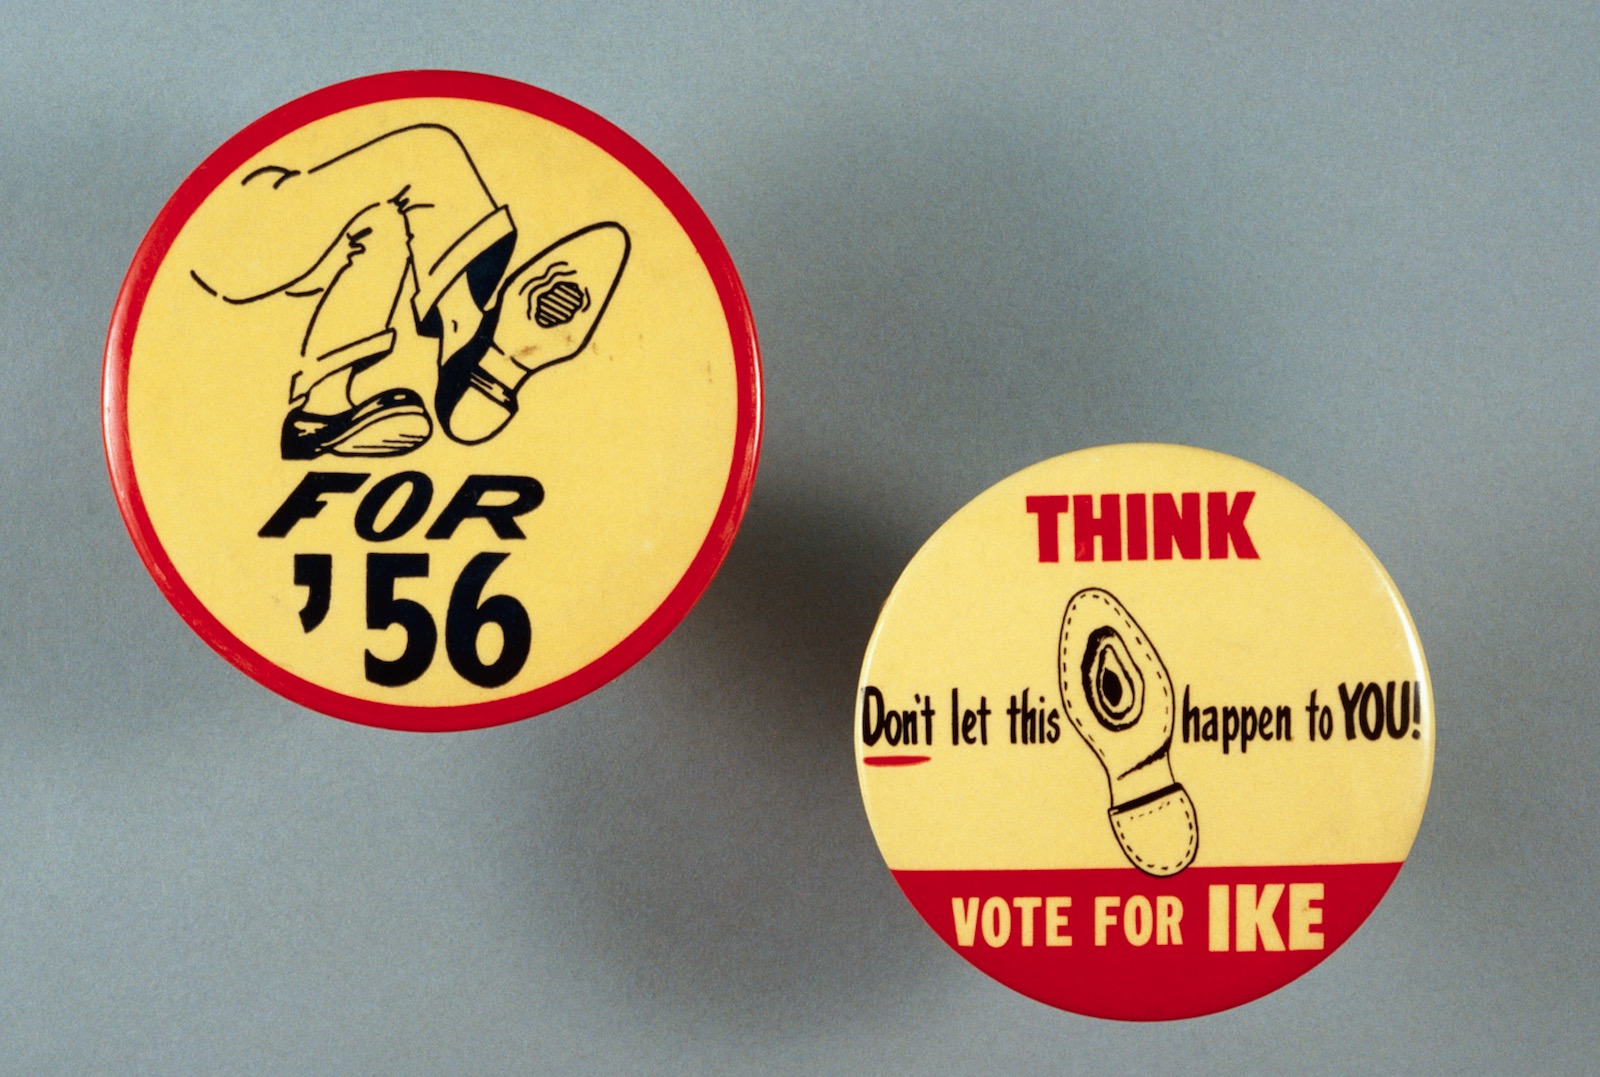 Campaign buttons for President Dwight D. Eisenhower’s 1956 reelection